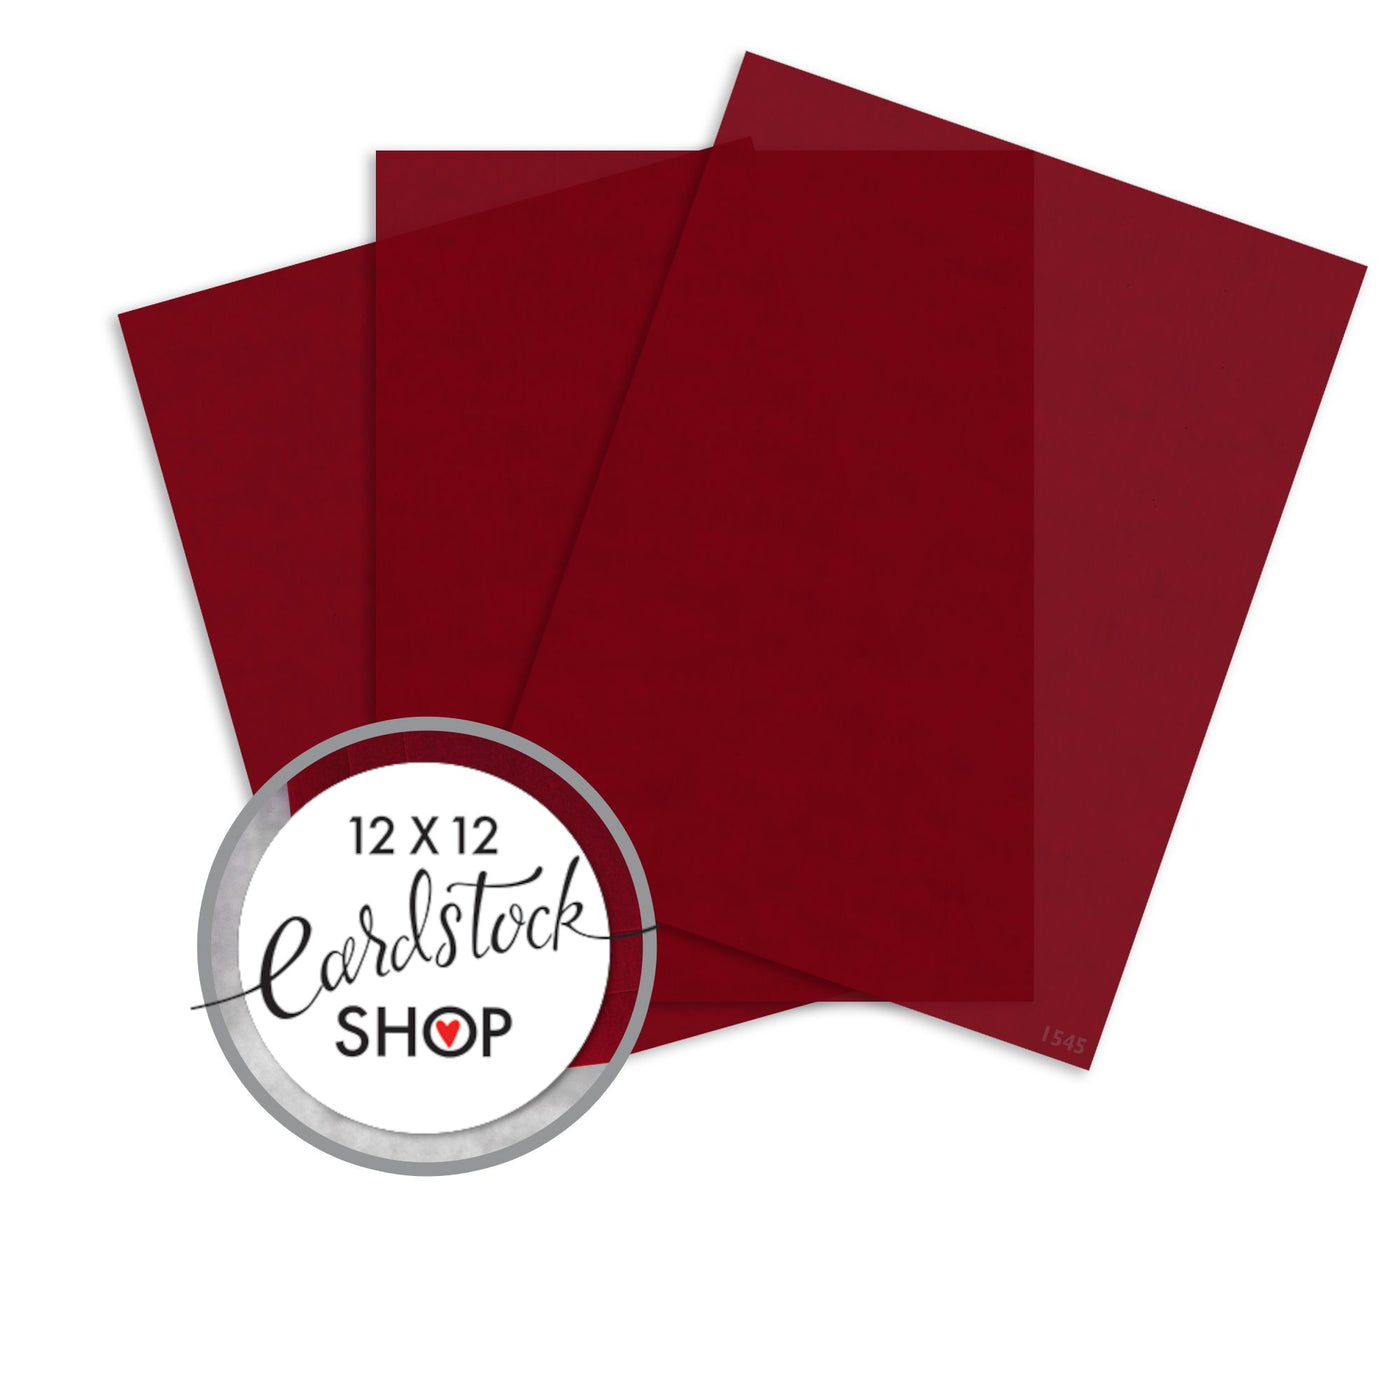 RED LACQUER translucent vellum - 8.5x11 sheets - by Curious Translucents